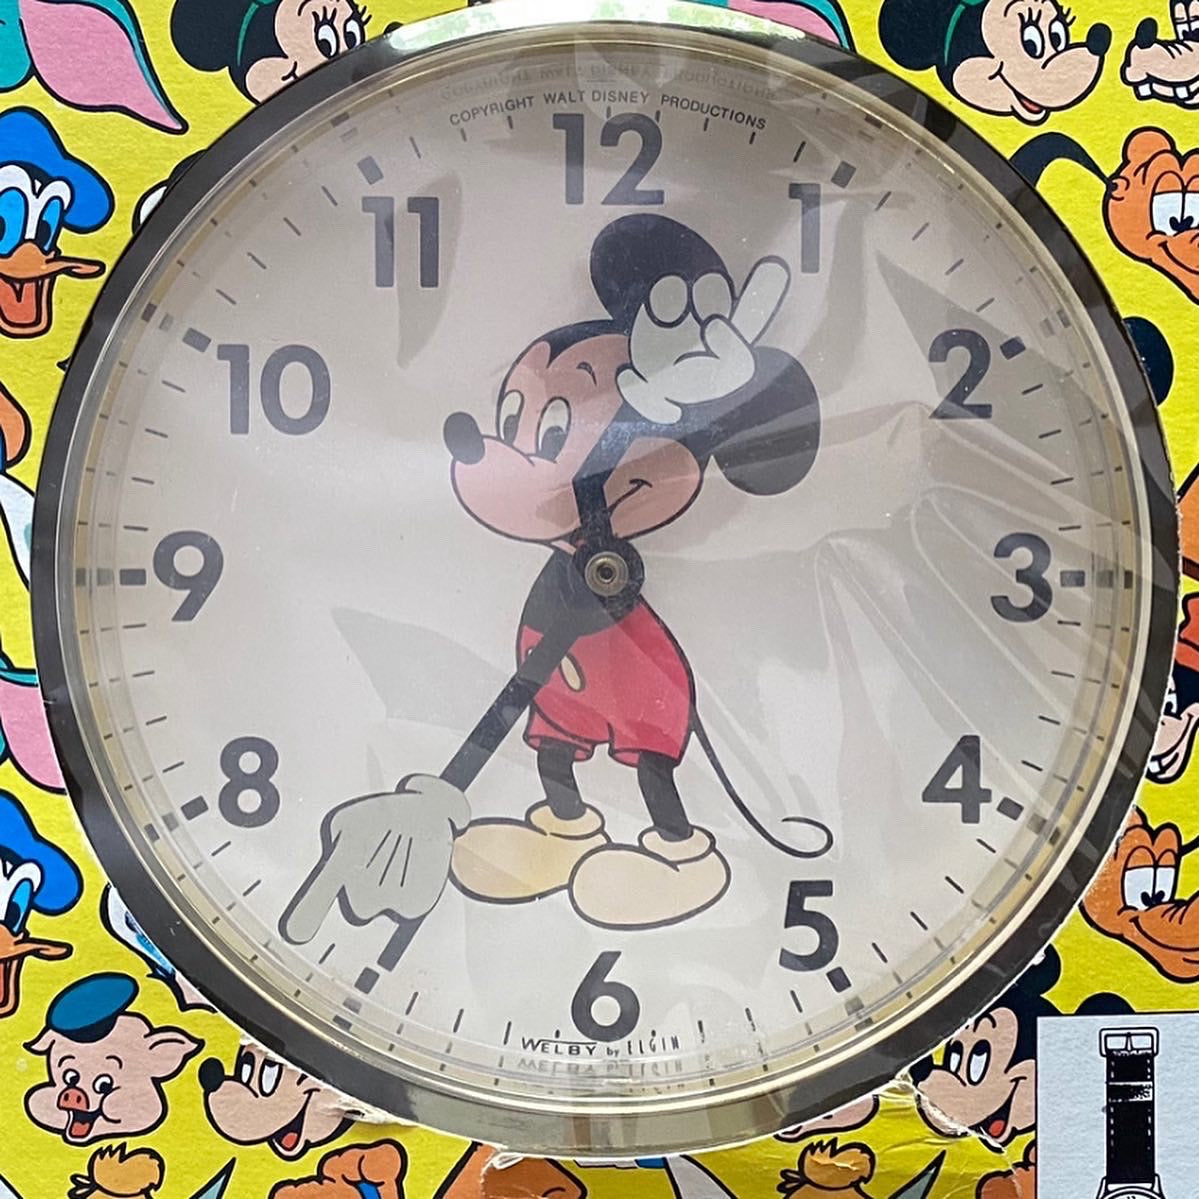 Vintage Disney Time, Giant Mickey Mouse Wristwatch Wall Clock by Elgin